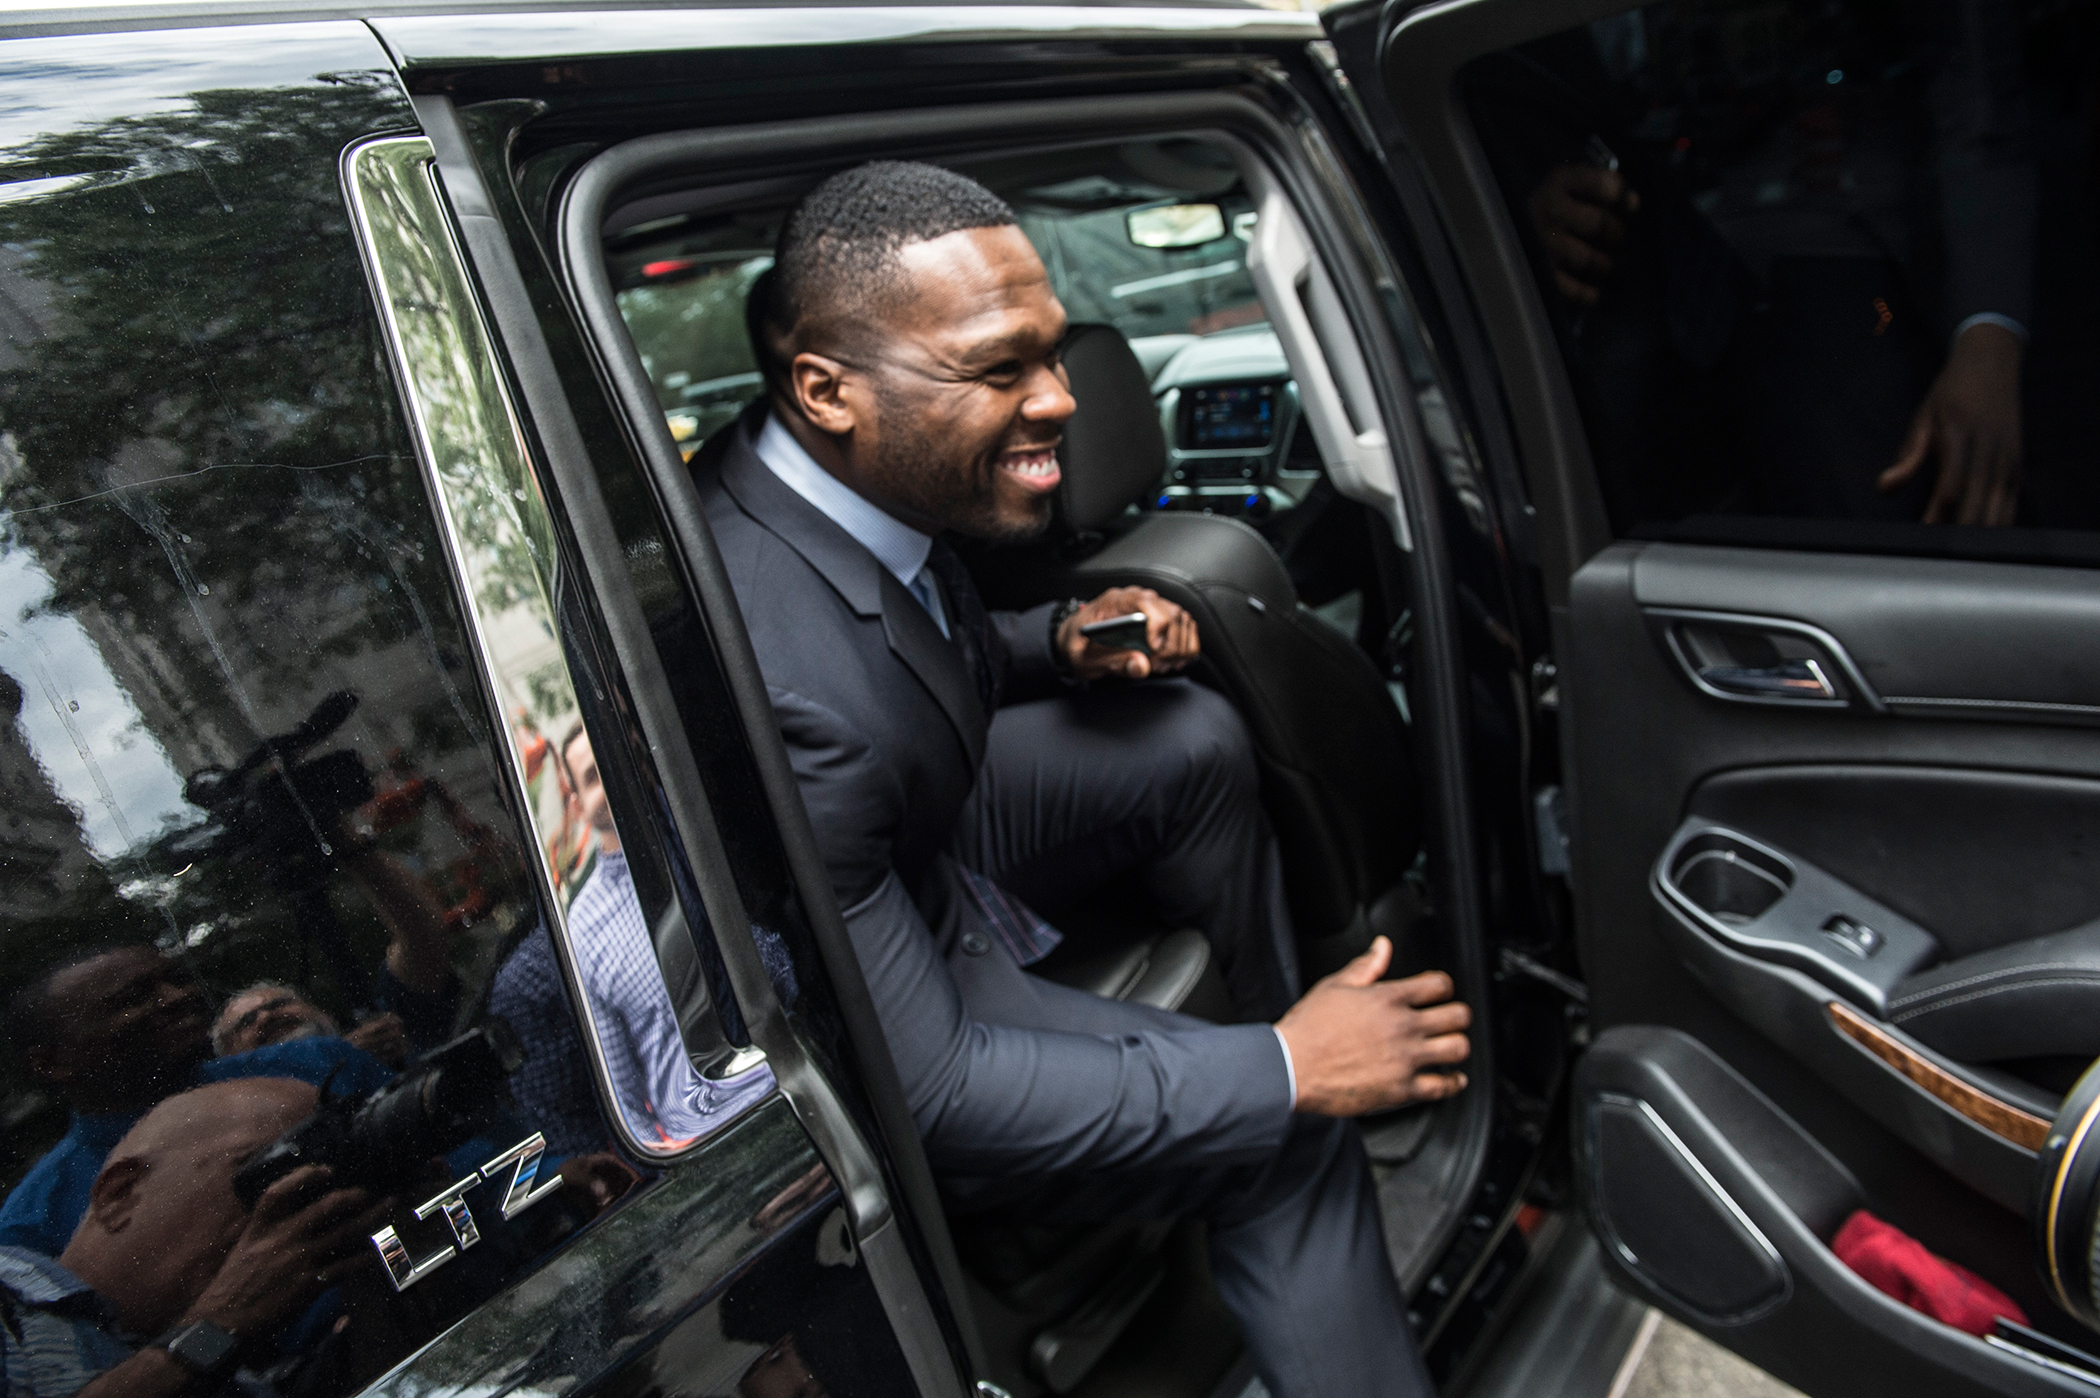 Curtis Jackson, aka 50 Cent, in Manhattan on Tuesday, July 21, 2015.